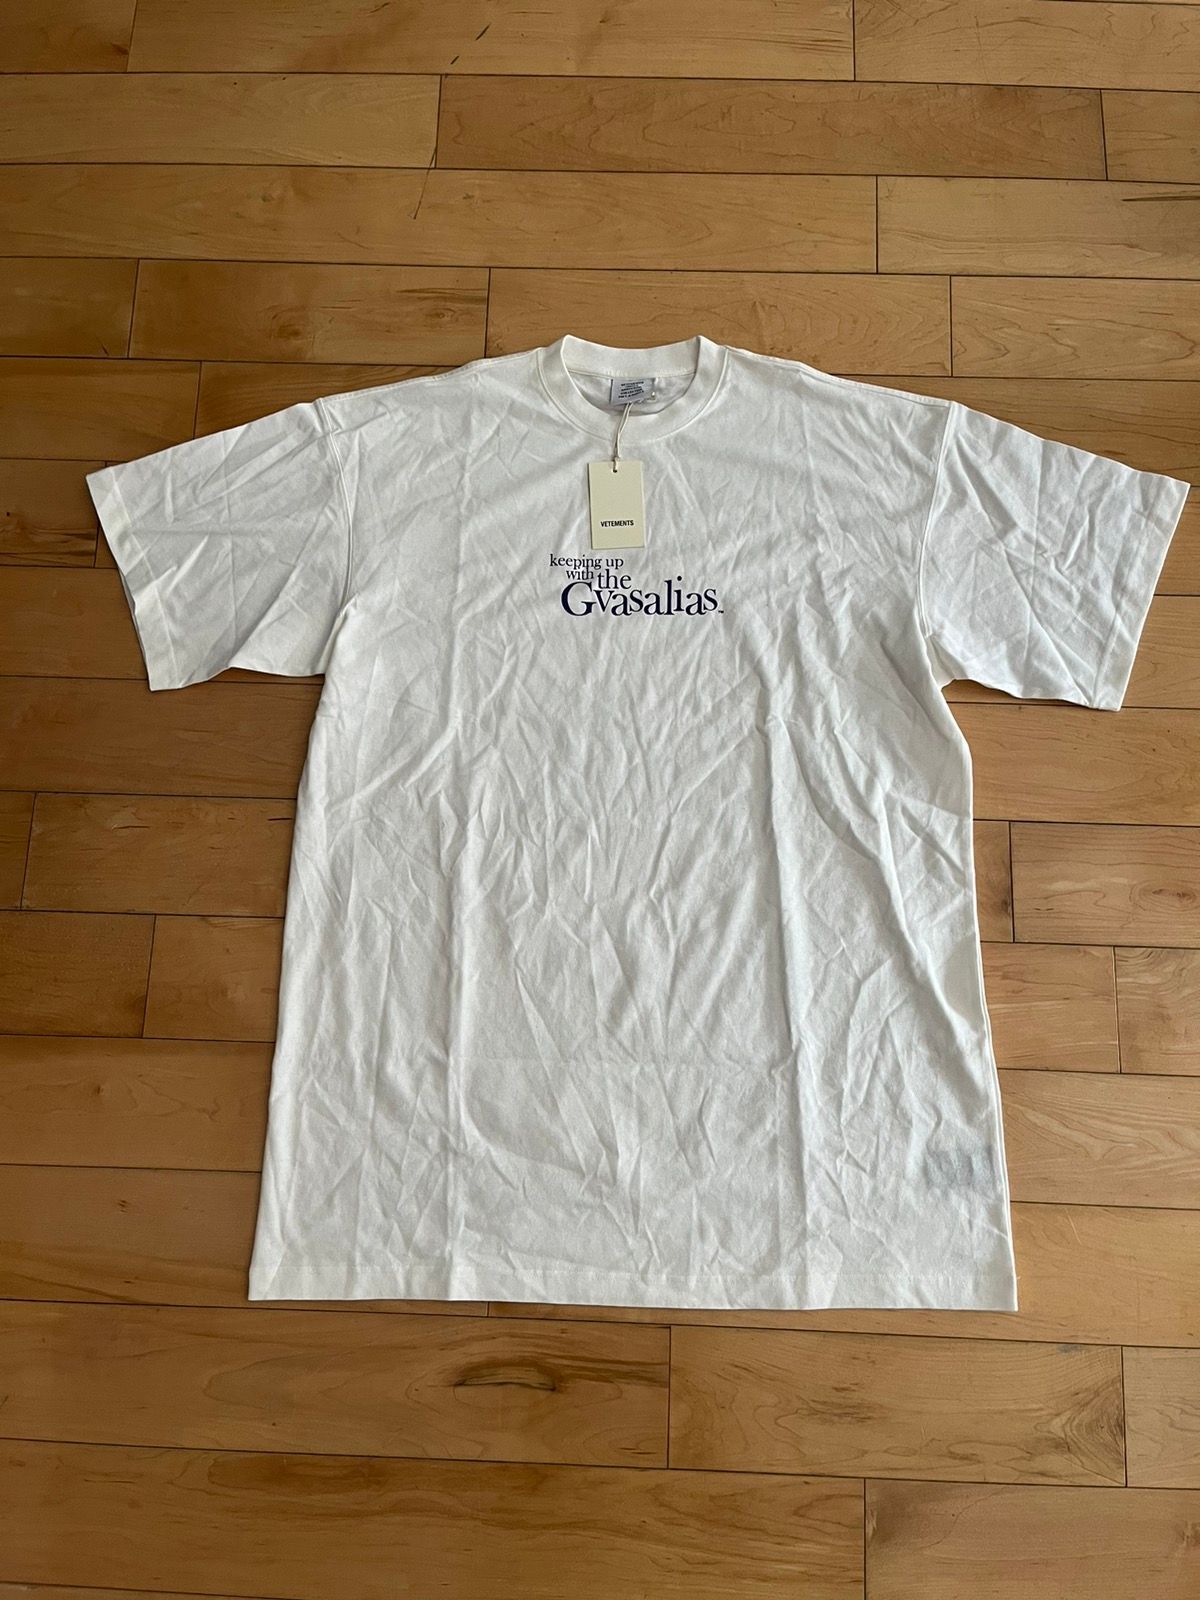 NWT - Vetements "Keeping up with the Gvasalias" T-shirt - 1